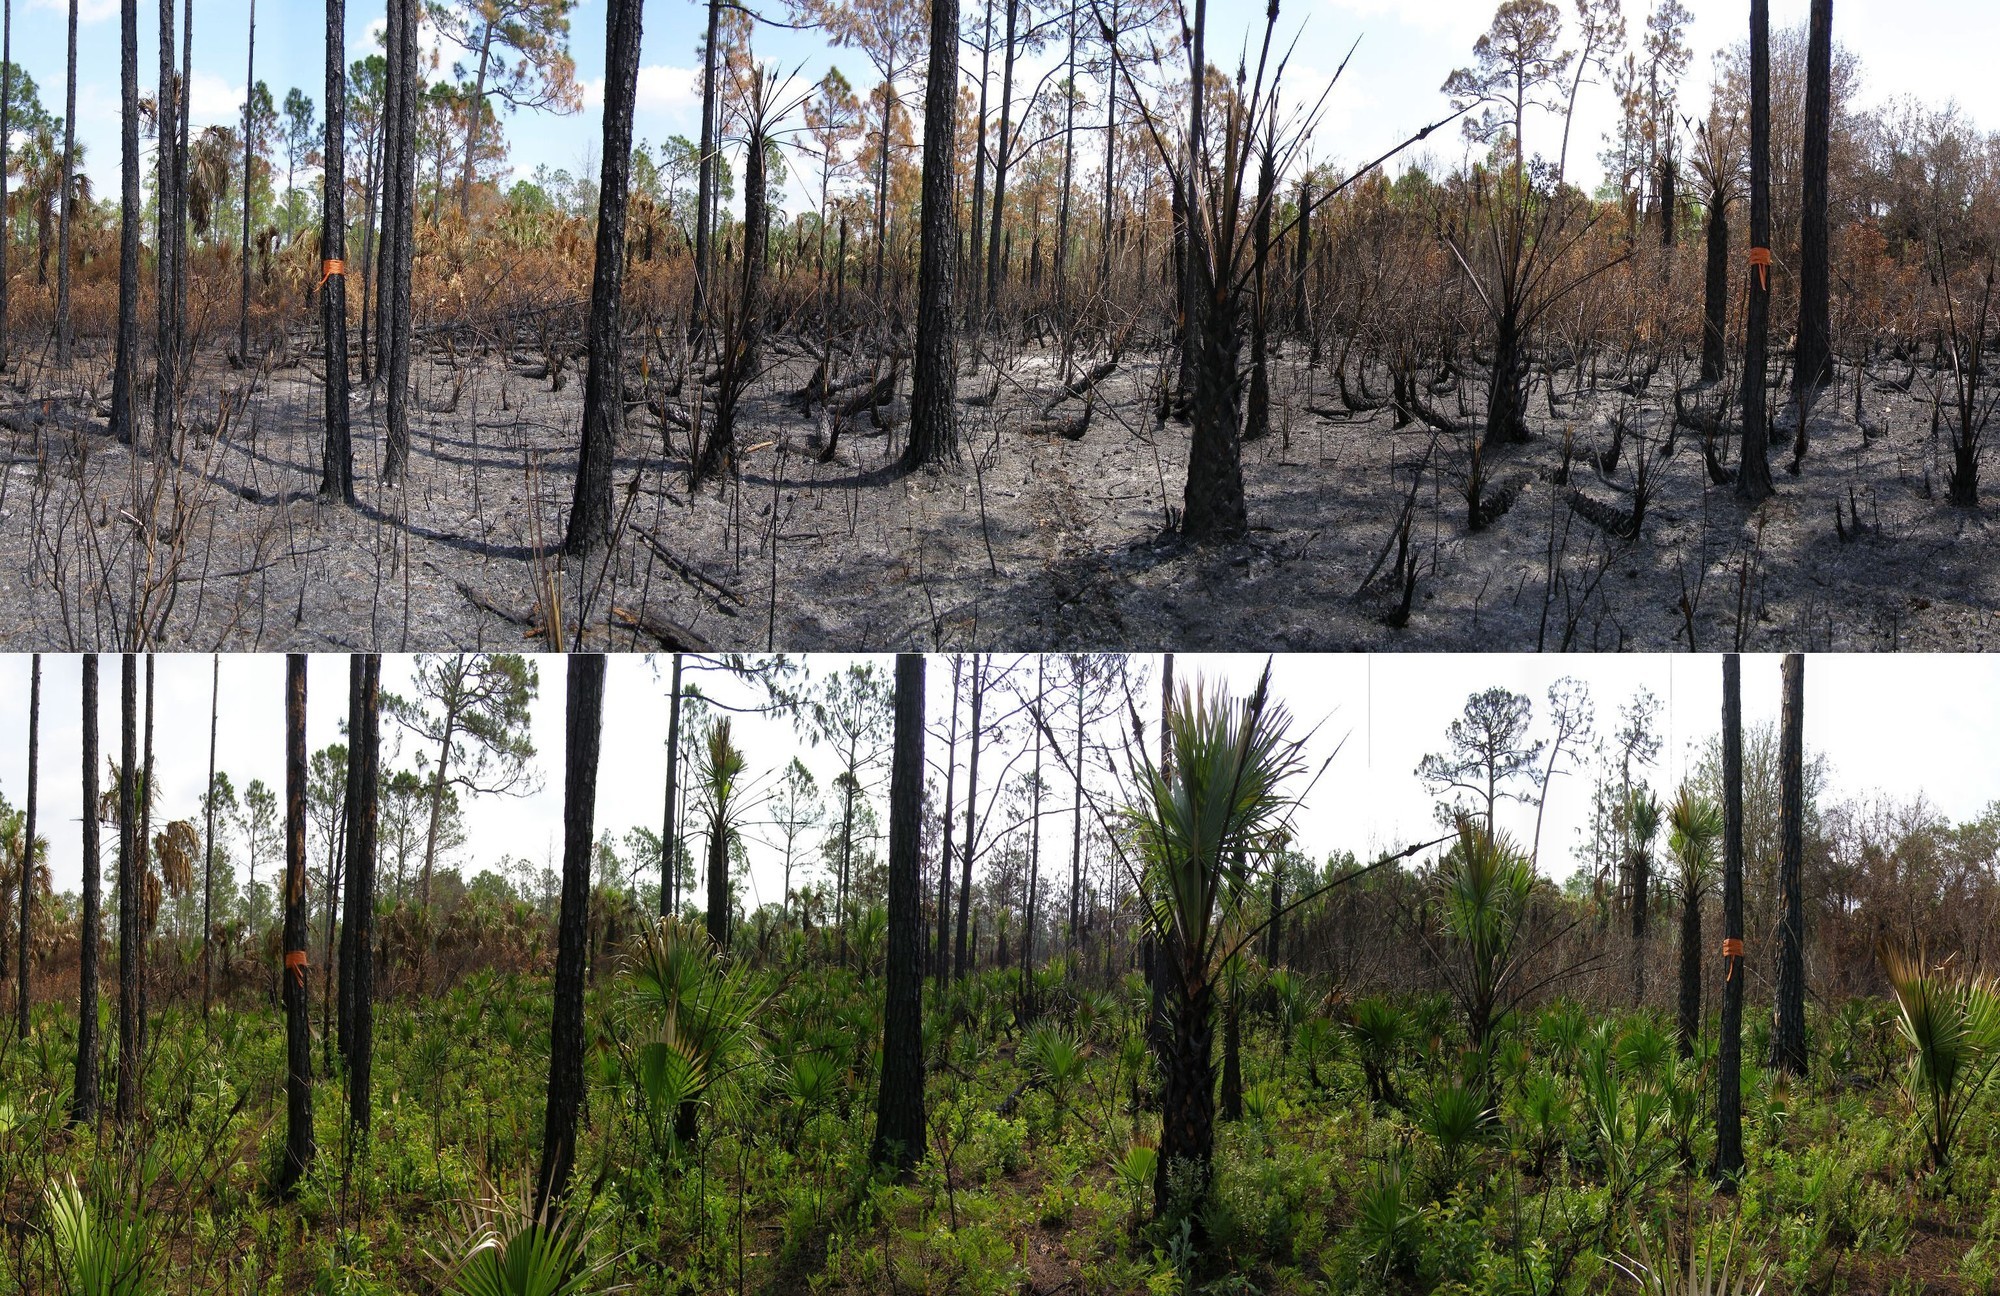 Comparative image showing shortly after fire and regrowth afterwards. Image courtesy Florida Panther National Wildlife Refuge.